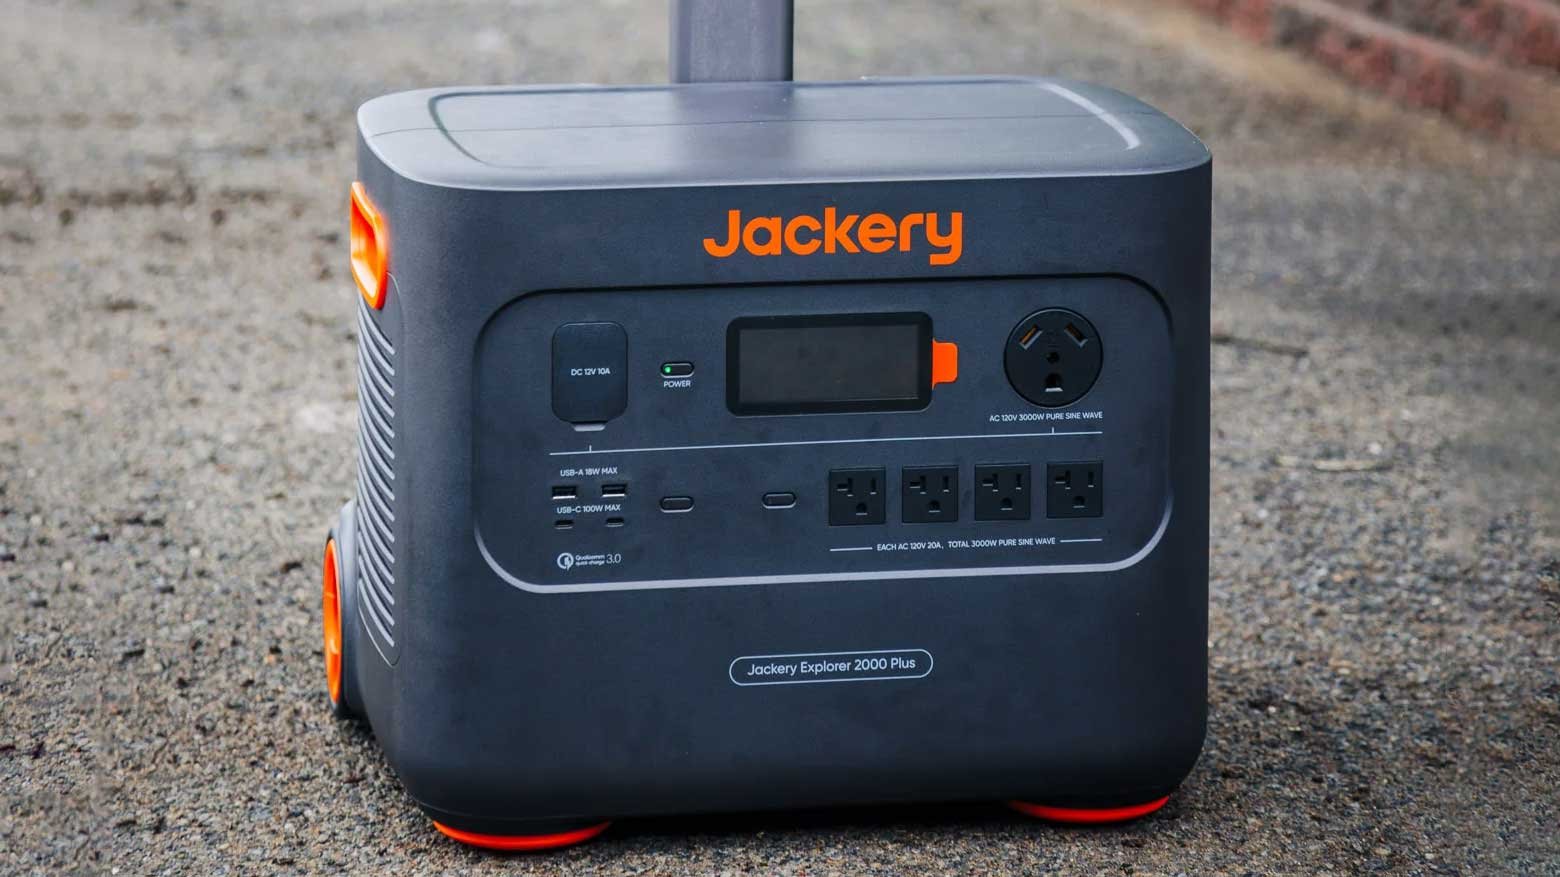 These limited Cyber Monday deals have Jackery generators at their lowest prices of the year